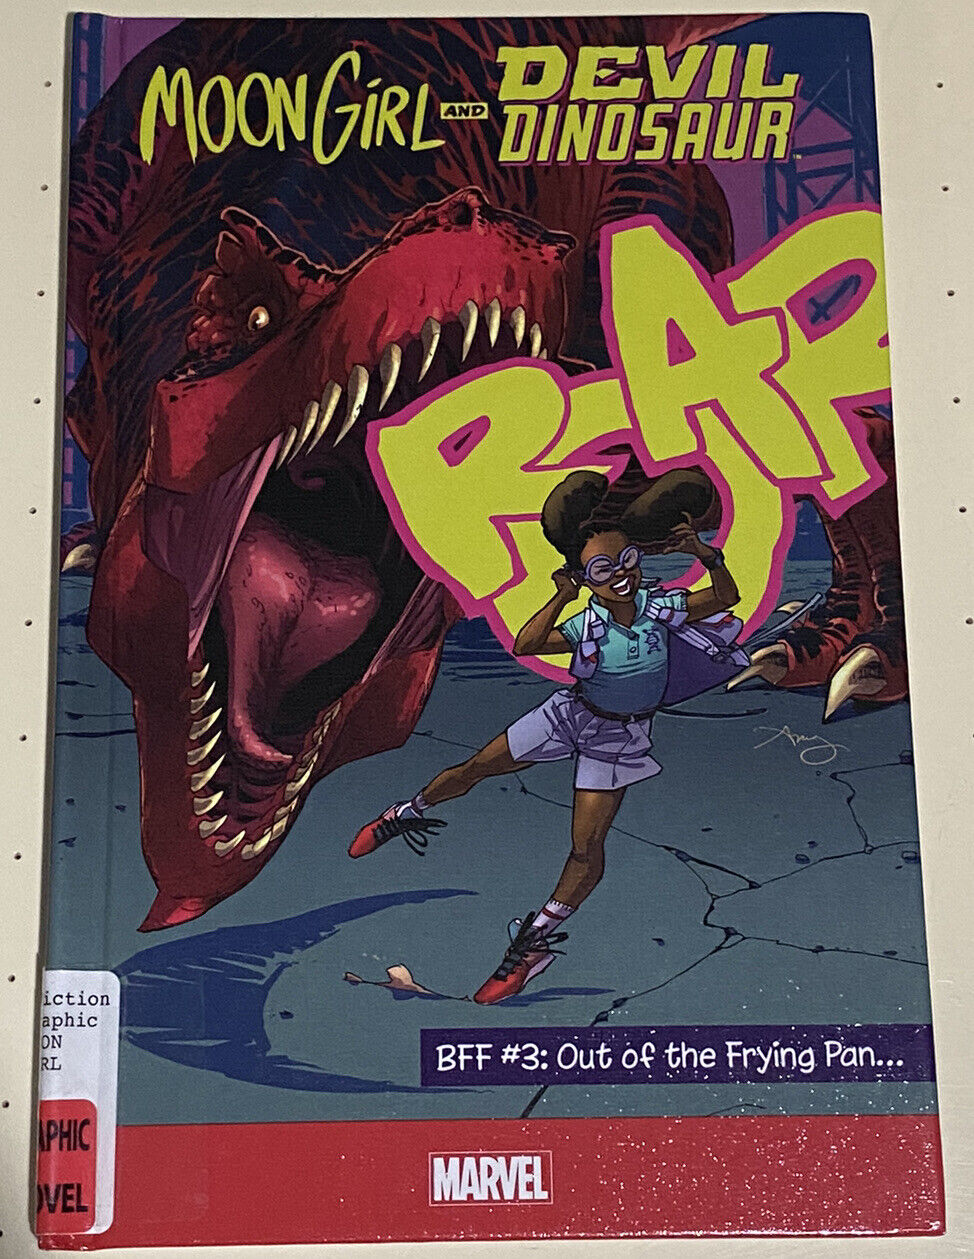 Marvel Moon Girl & Devil Dinosaur BBF#3: Out of the Frying Pan- Library Binding